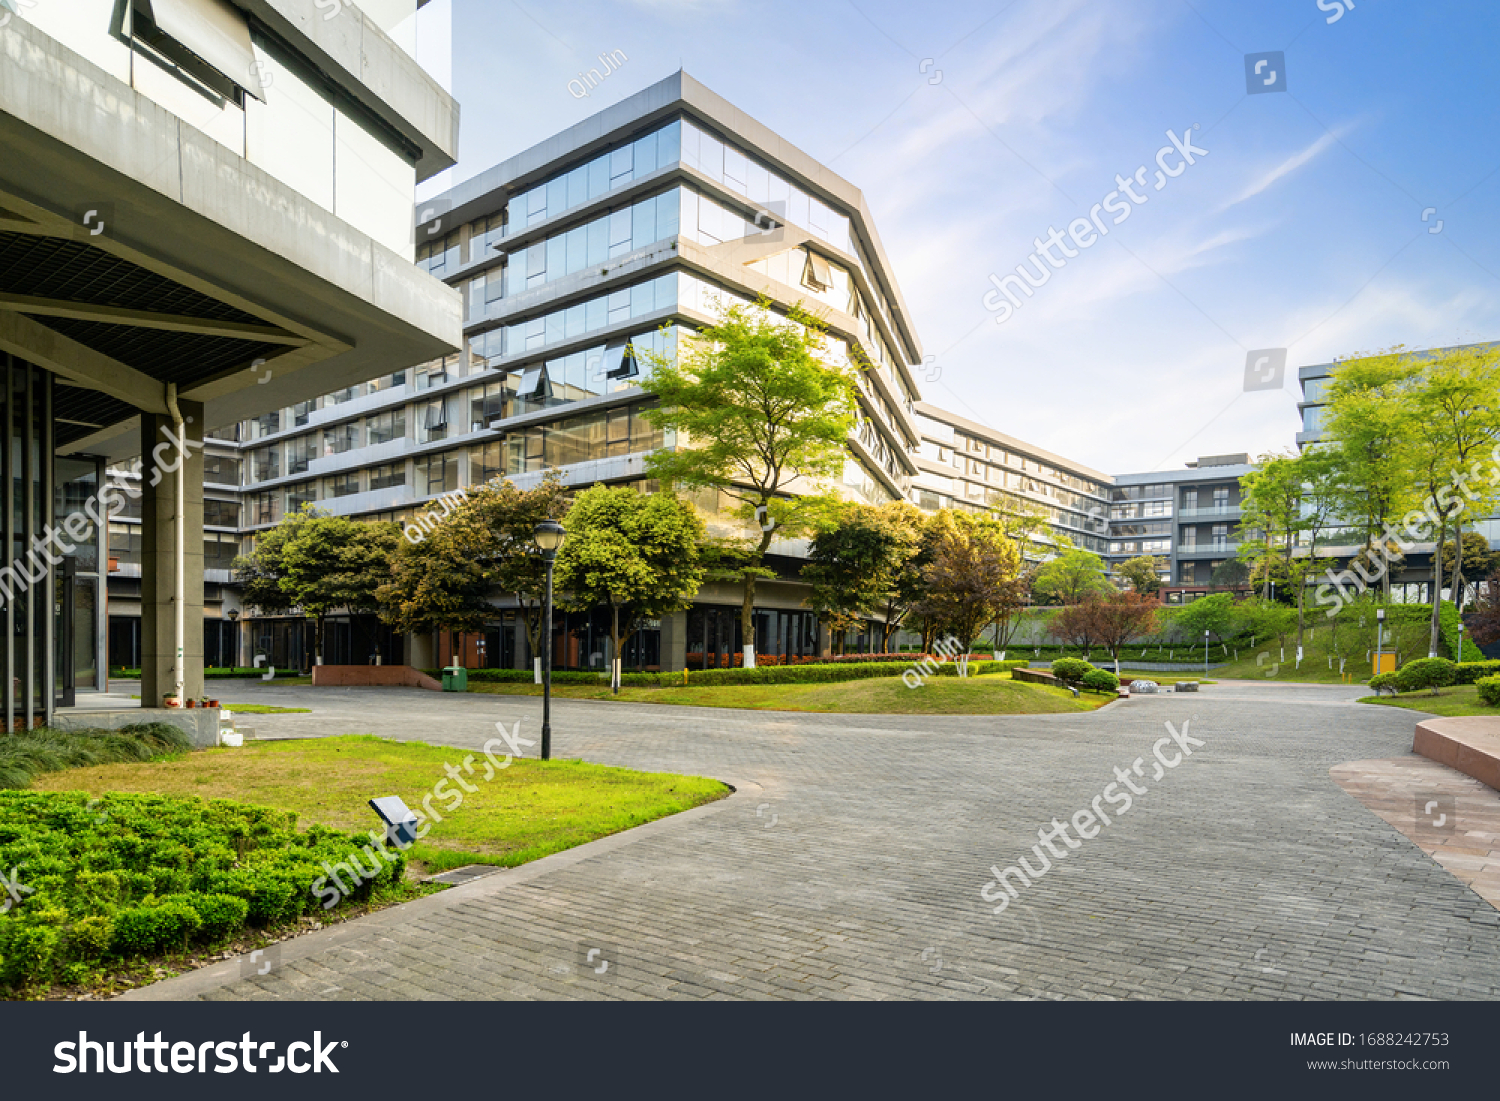 Green environment of office buildings in science and technology park, Chongqing, China #1688242753